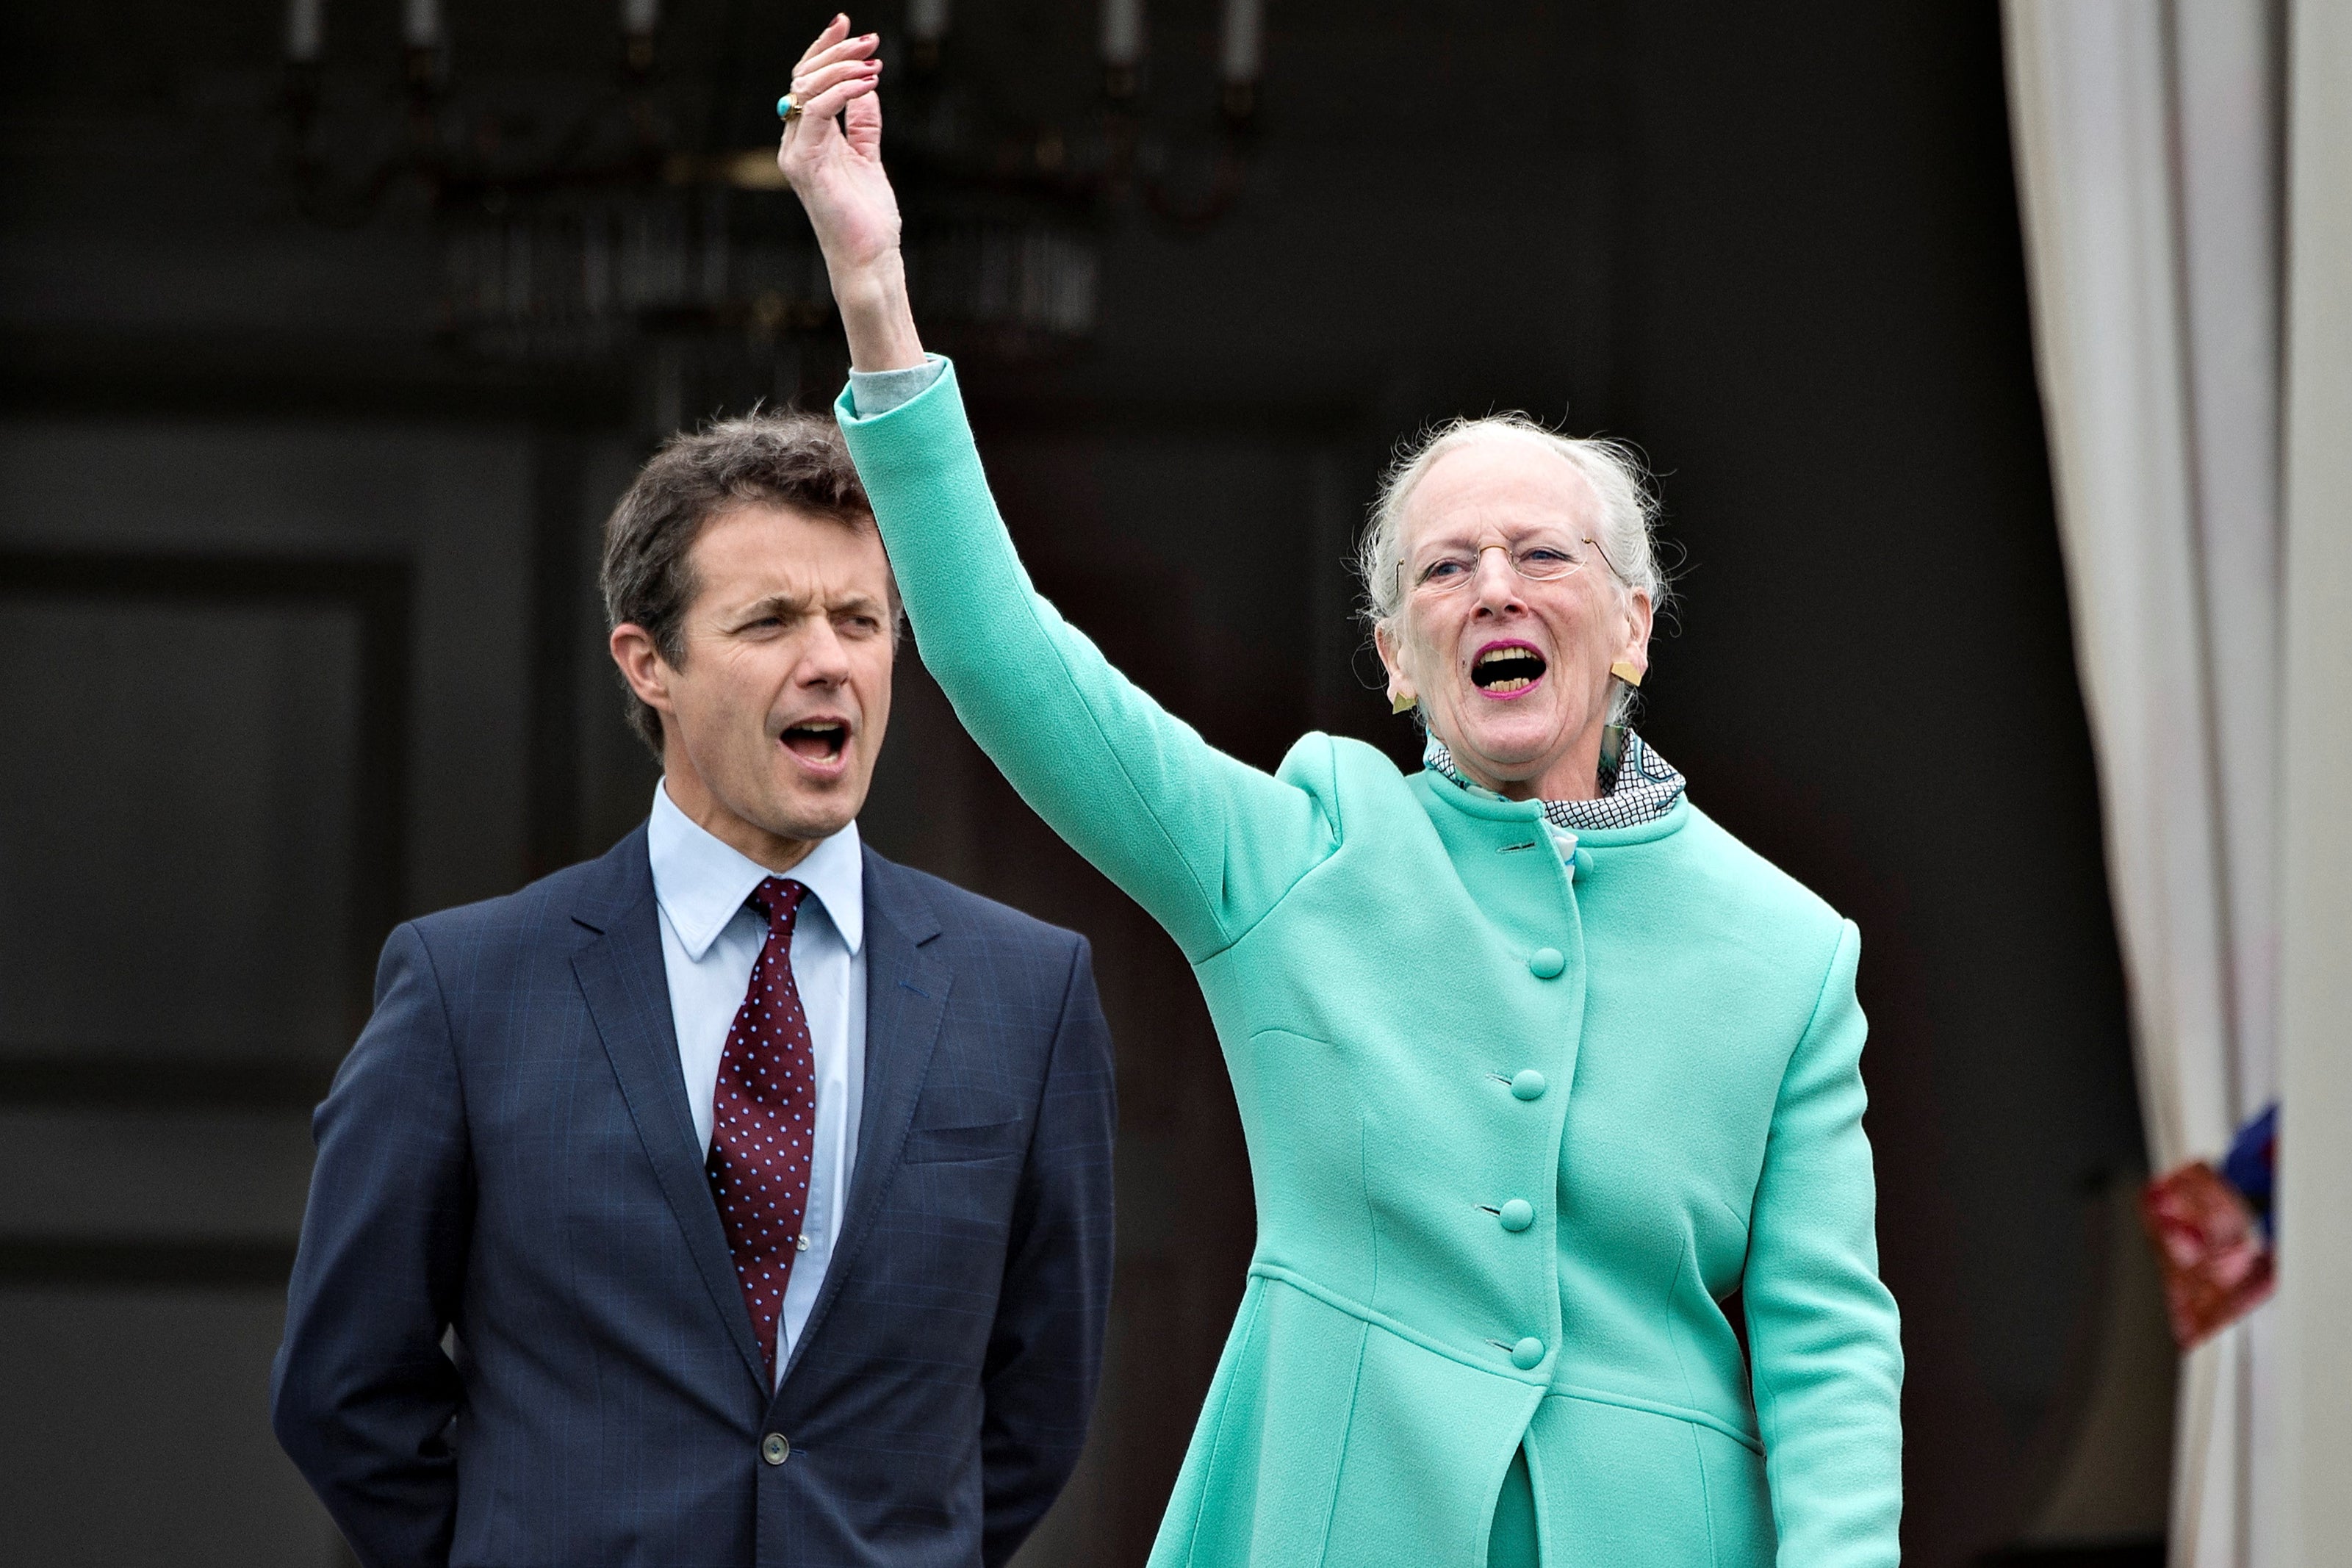 Denmark’s Queen Margrethe stepped aside for her son Crown Prince Frederik on New Year’s Eve